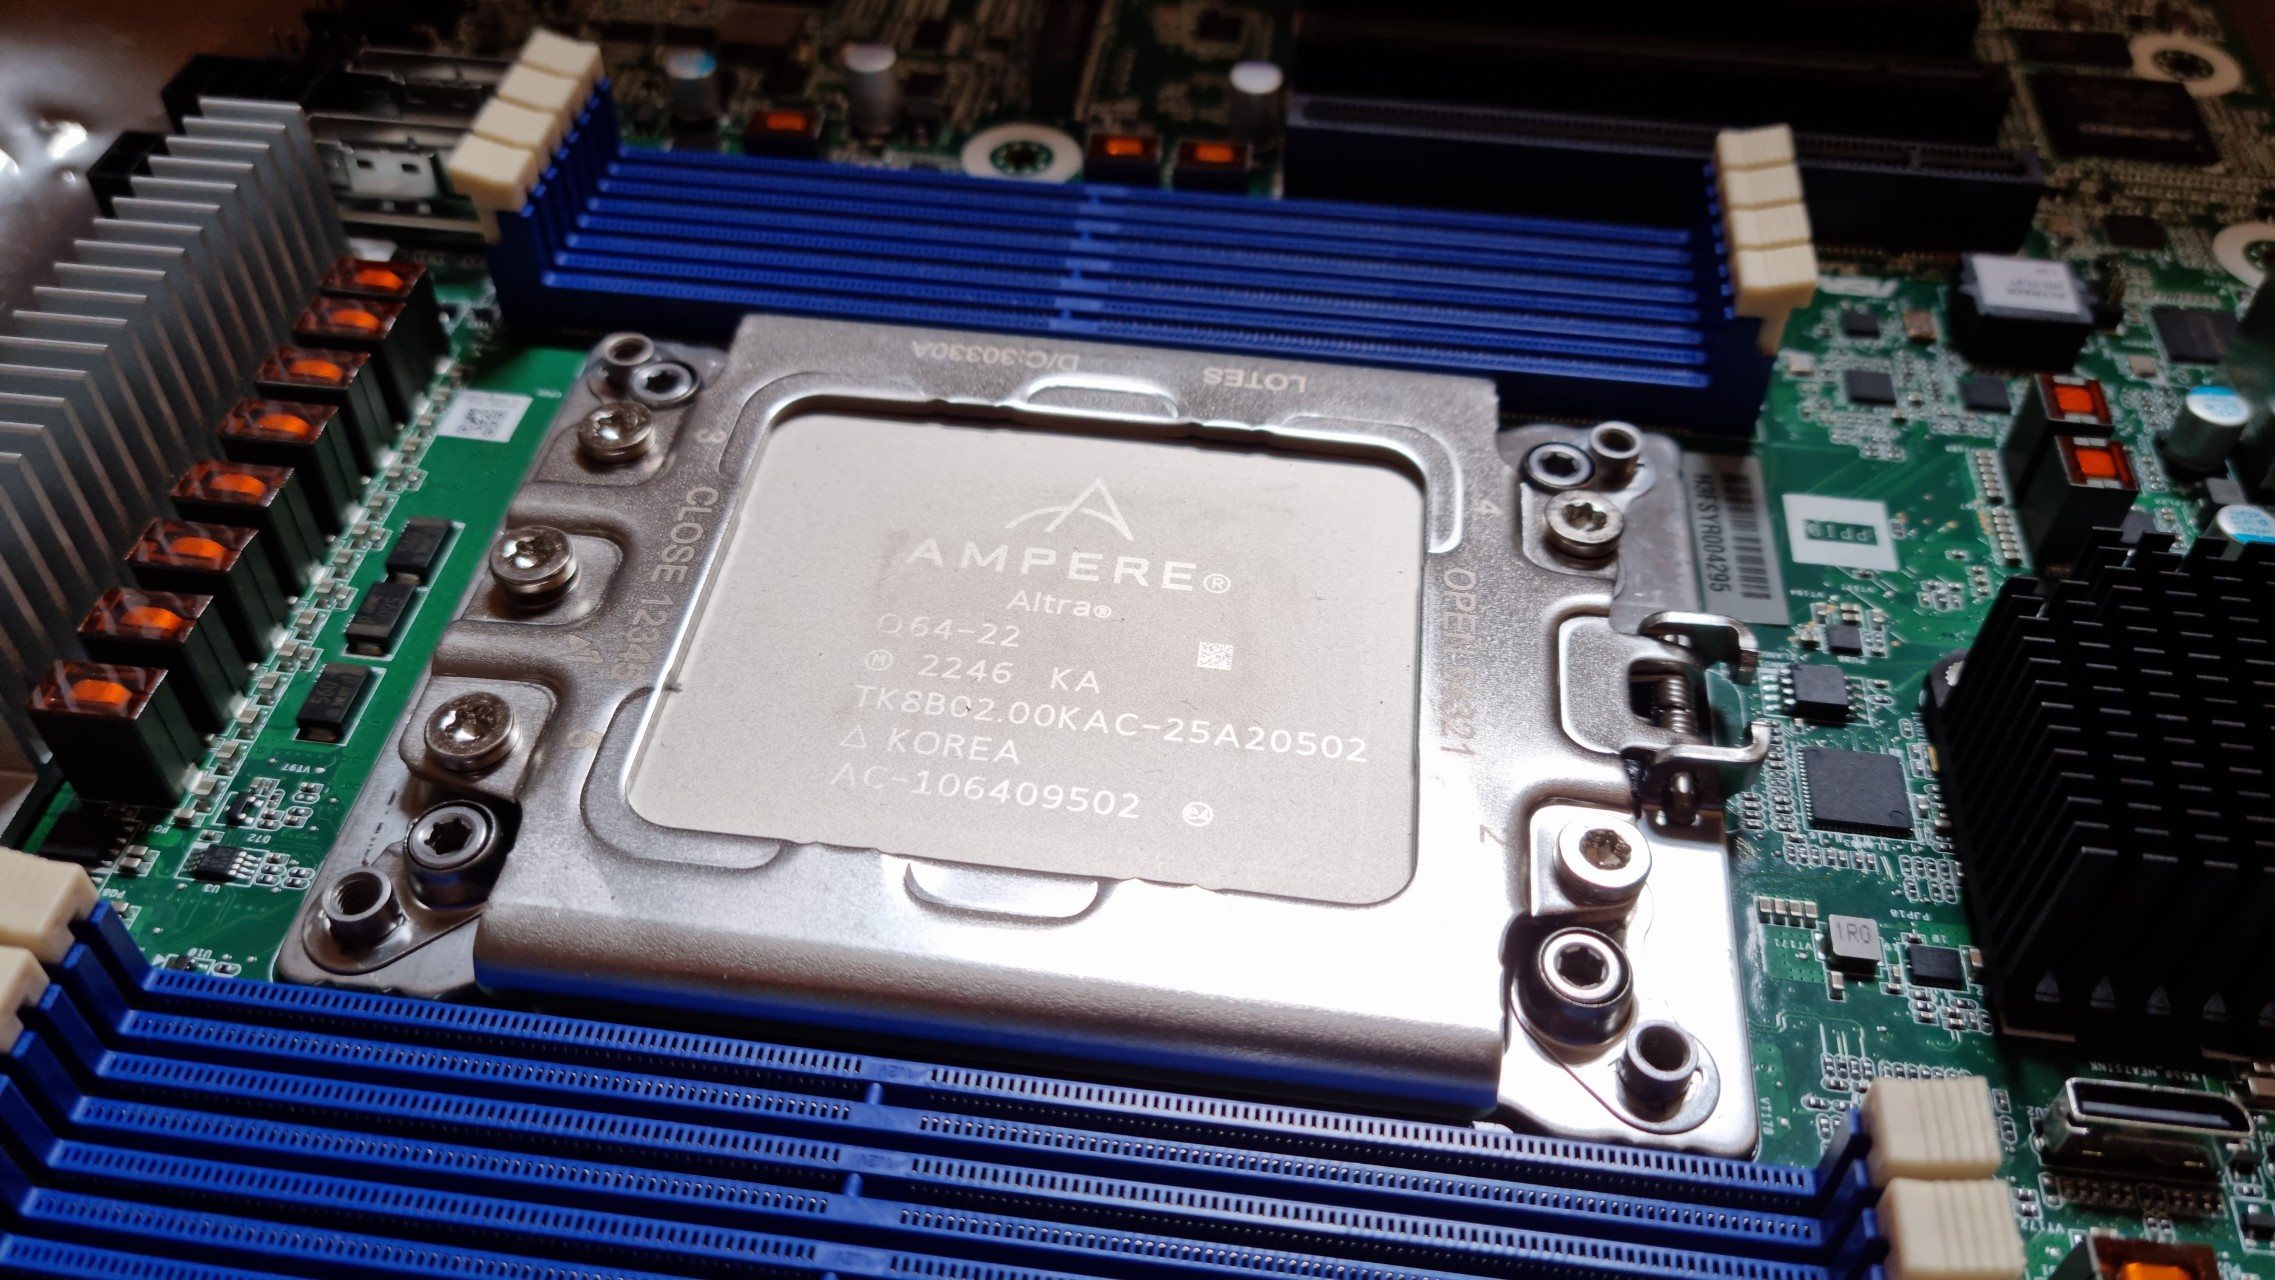 The Ampere Altra Q64-22 CPU, mounted on the ASRock Rack ALTRAD8UD-1L2T motherboard